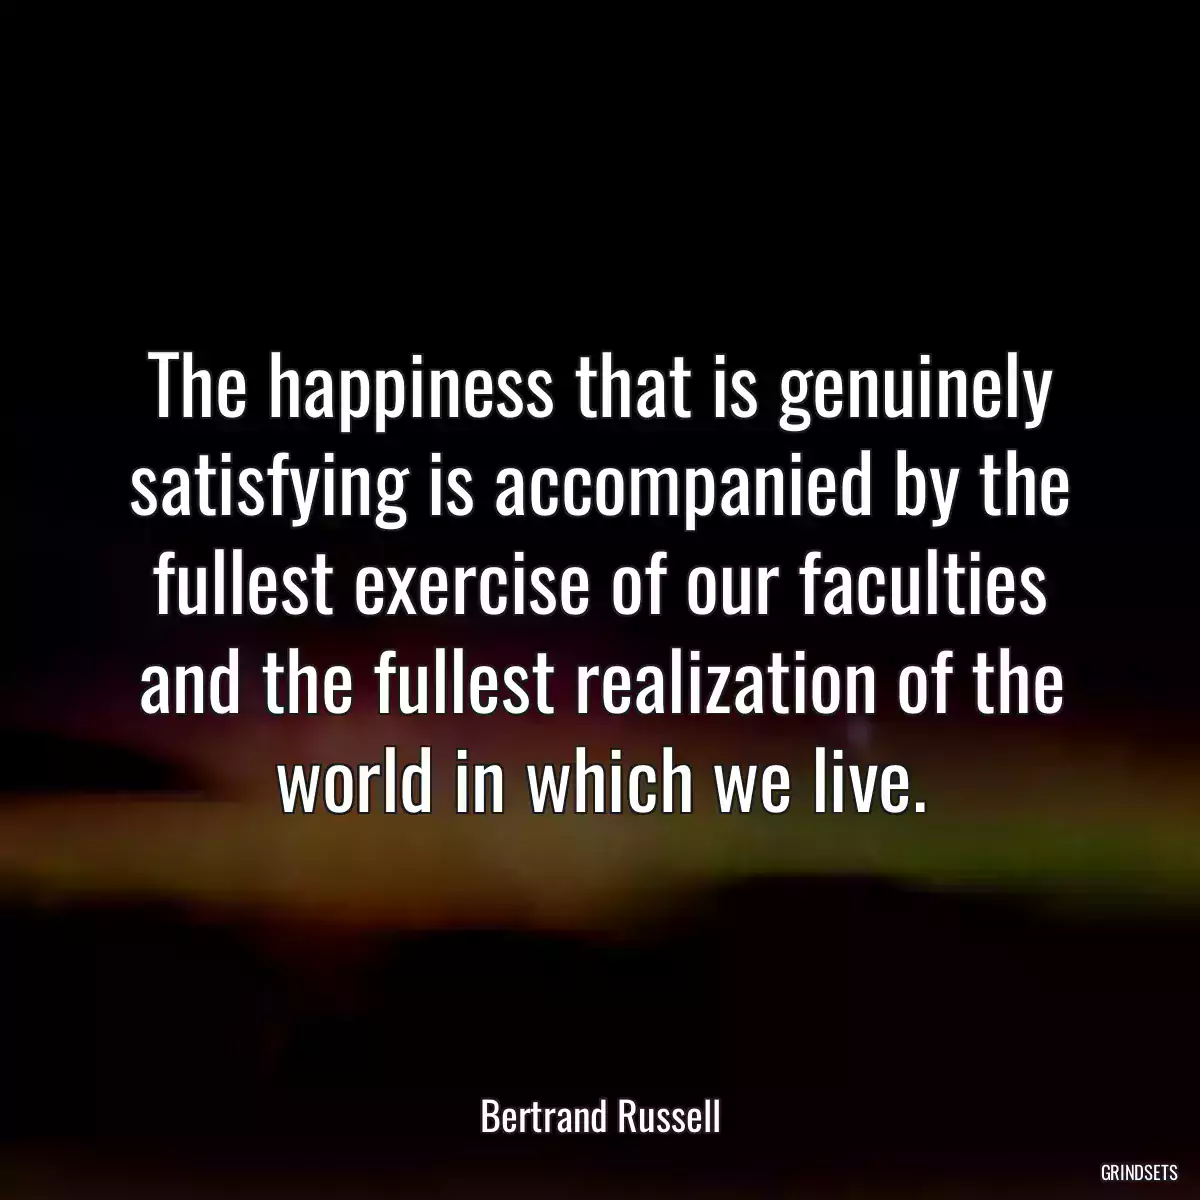 The happiness that is genuinely satisfying is accompanied by the fullest exercise of our faculties and the fullest realization of the world in which we live.